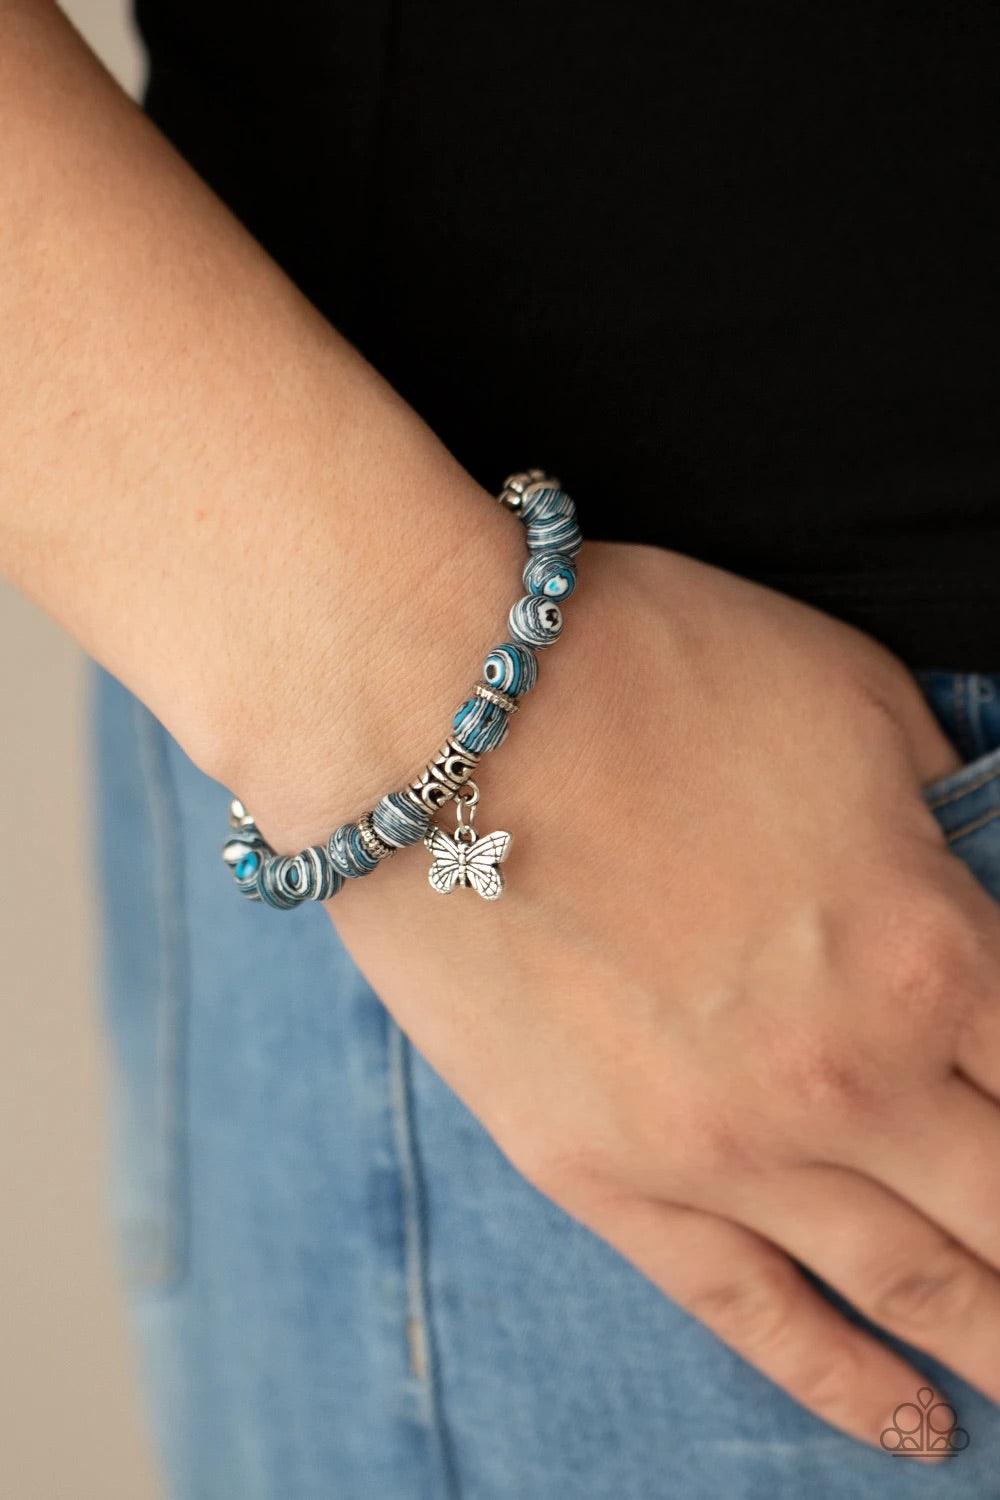 Paparazzi Accessories Butterfly Wishes - Blue Swirling with blue, black, and white accents, colorful stone beads and ornate silver accents are threaded along stretchy bands around the wrist. A dainty silver butterfly charm dangles from the display, adding